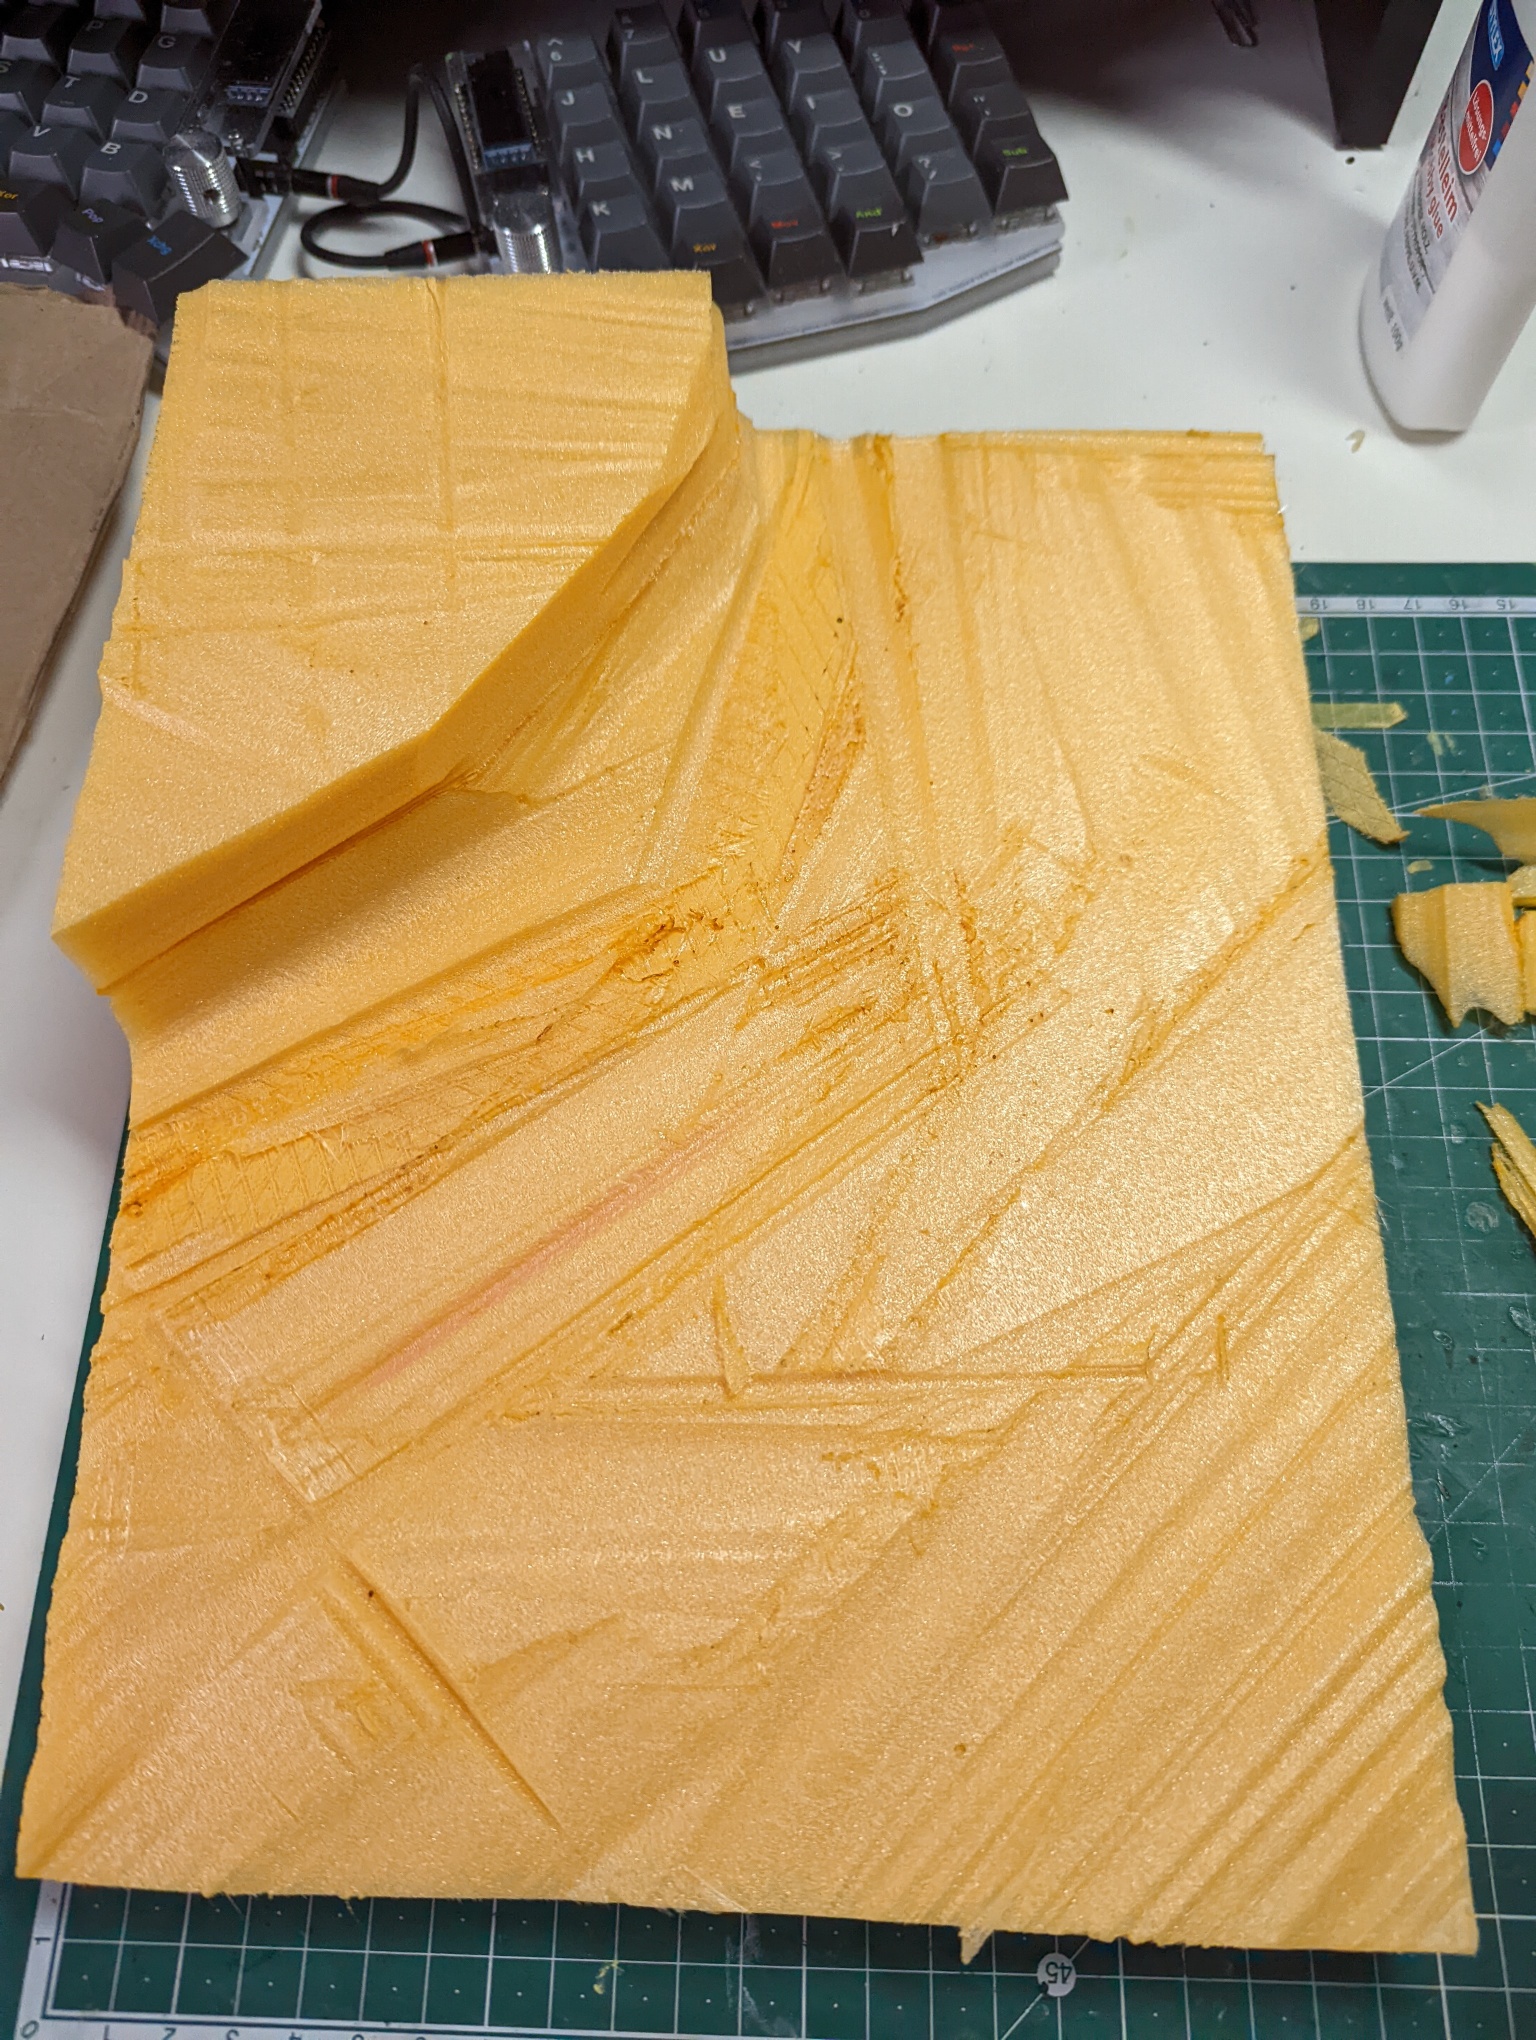 Used my hot-wire cutter to create the basic shape. I wanted to have some interesting terrain feature in the corner, something like a small cliff. I learned that using hot glue to attach the sheets of foam is not the smartest since it is much harder to cut with the hot-wire cutter.